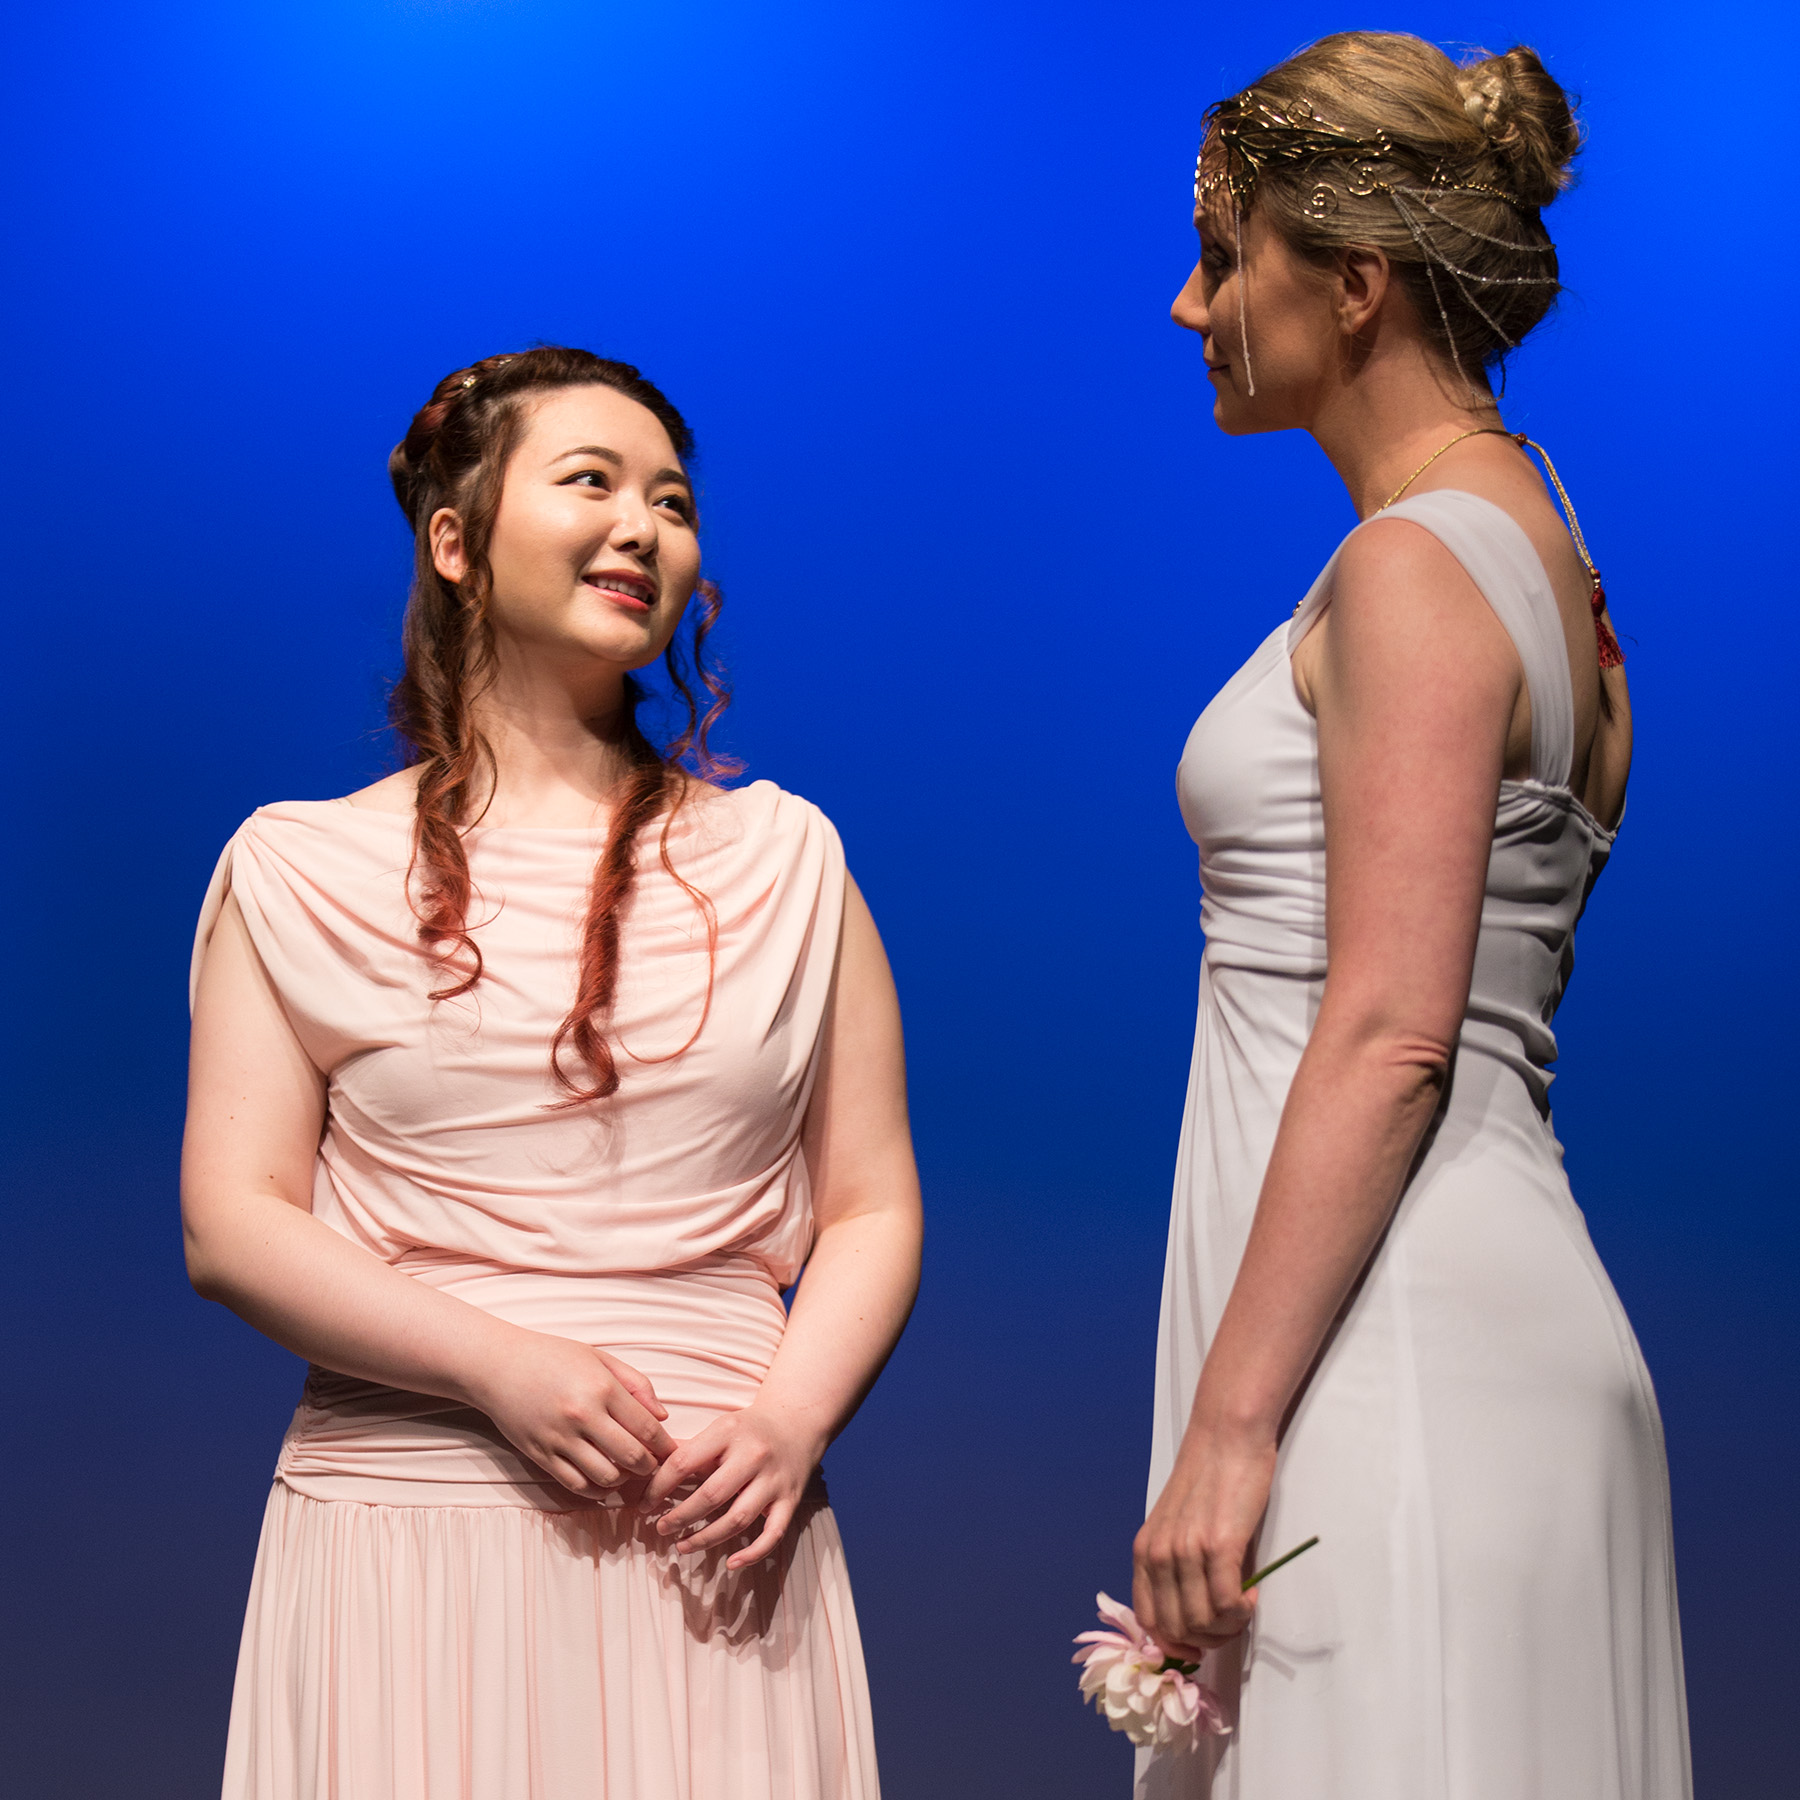 Onstage, two performers in pale Grecian gowns stand against a vibrant blue backdrop. On the left, a Chinese Canadian woman with long auburn hair is clad in pale pink, and smiles up at a taller white woman with honey coloured hair clad in white, wearing a filigreed golden crown and holding a large pink blossom in her hand.